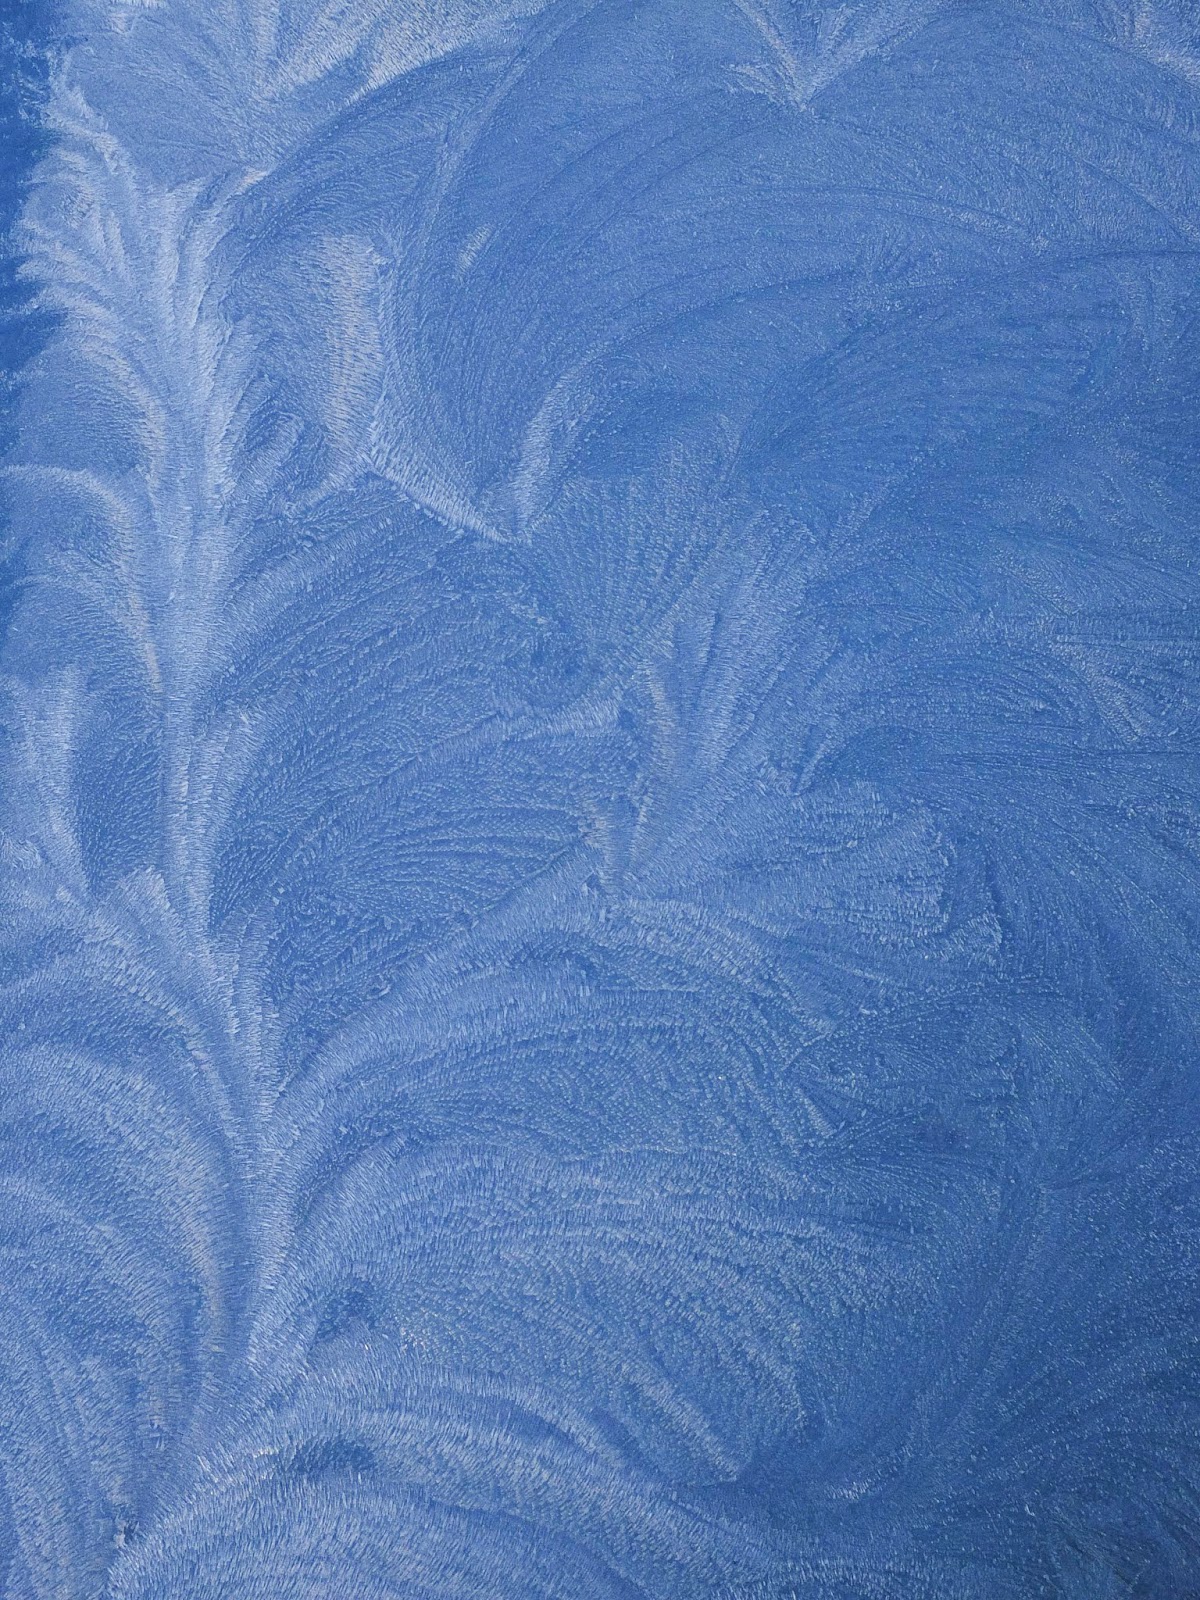 A pattern of frost on glass.